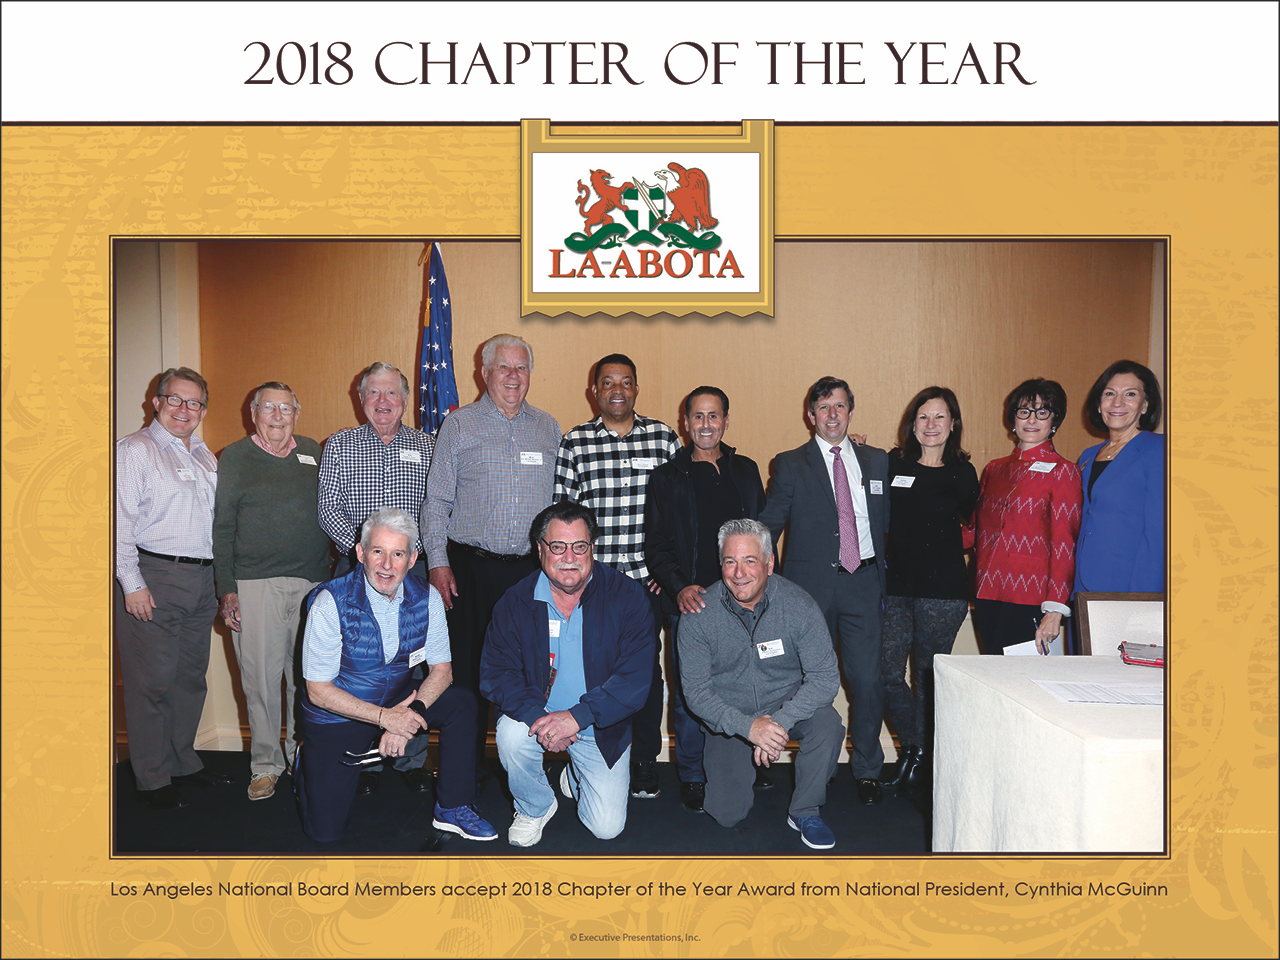 ABOTA CHAPTER OF THE YEAR 2018!